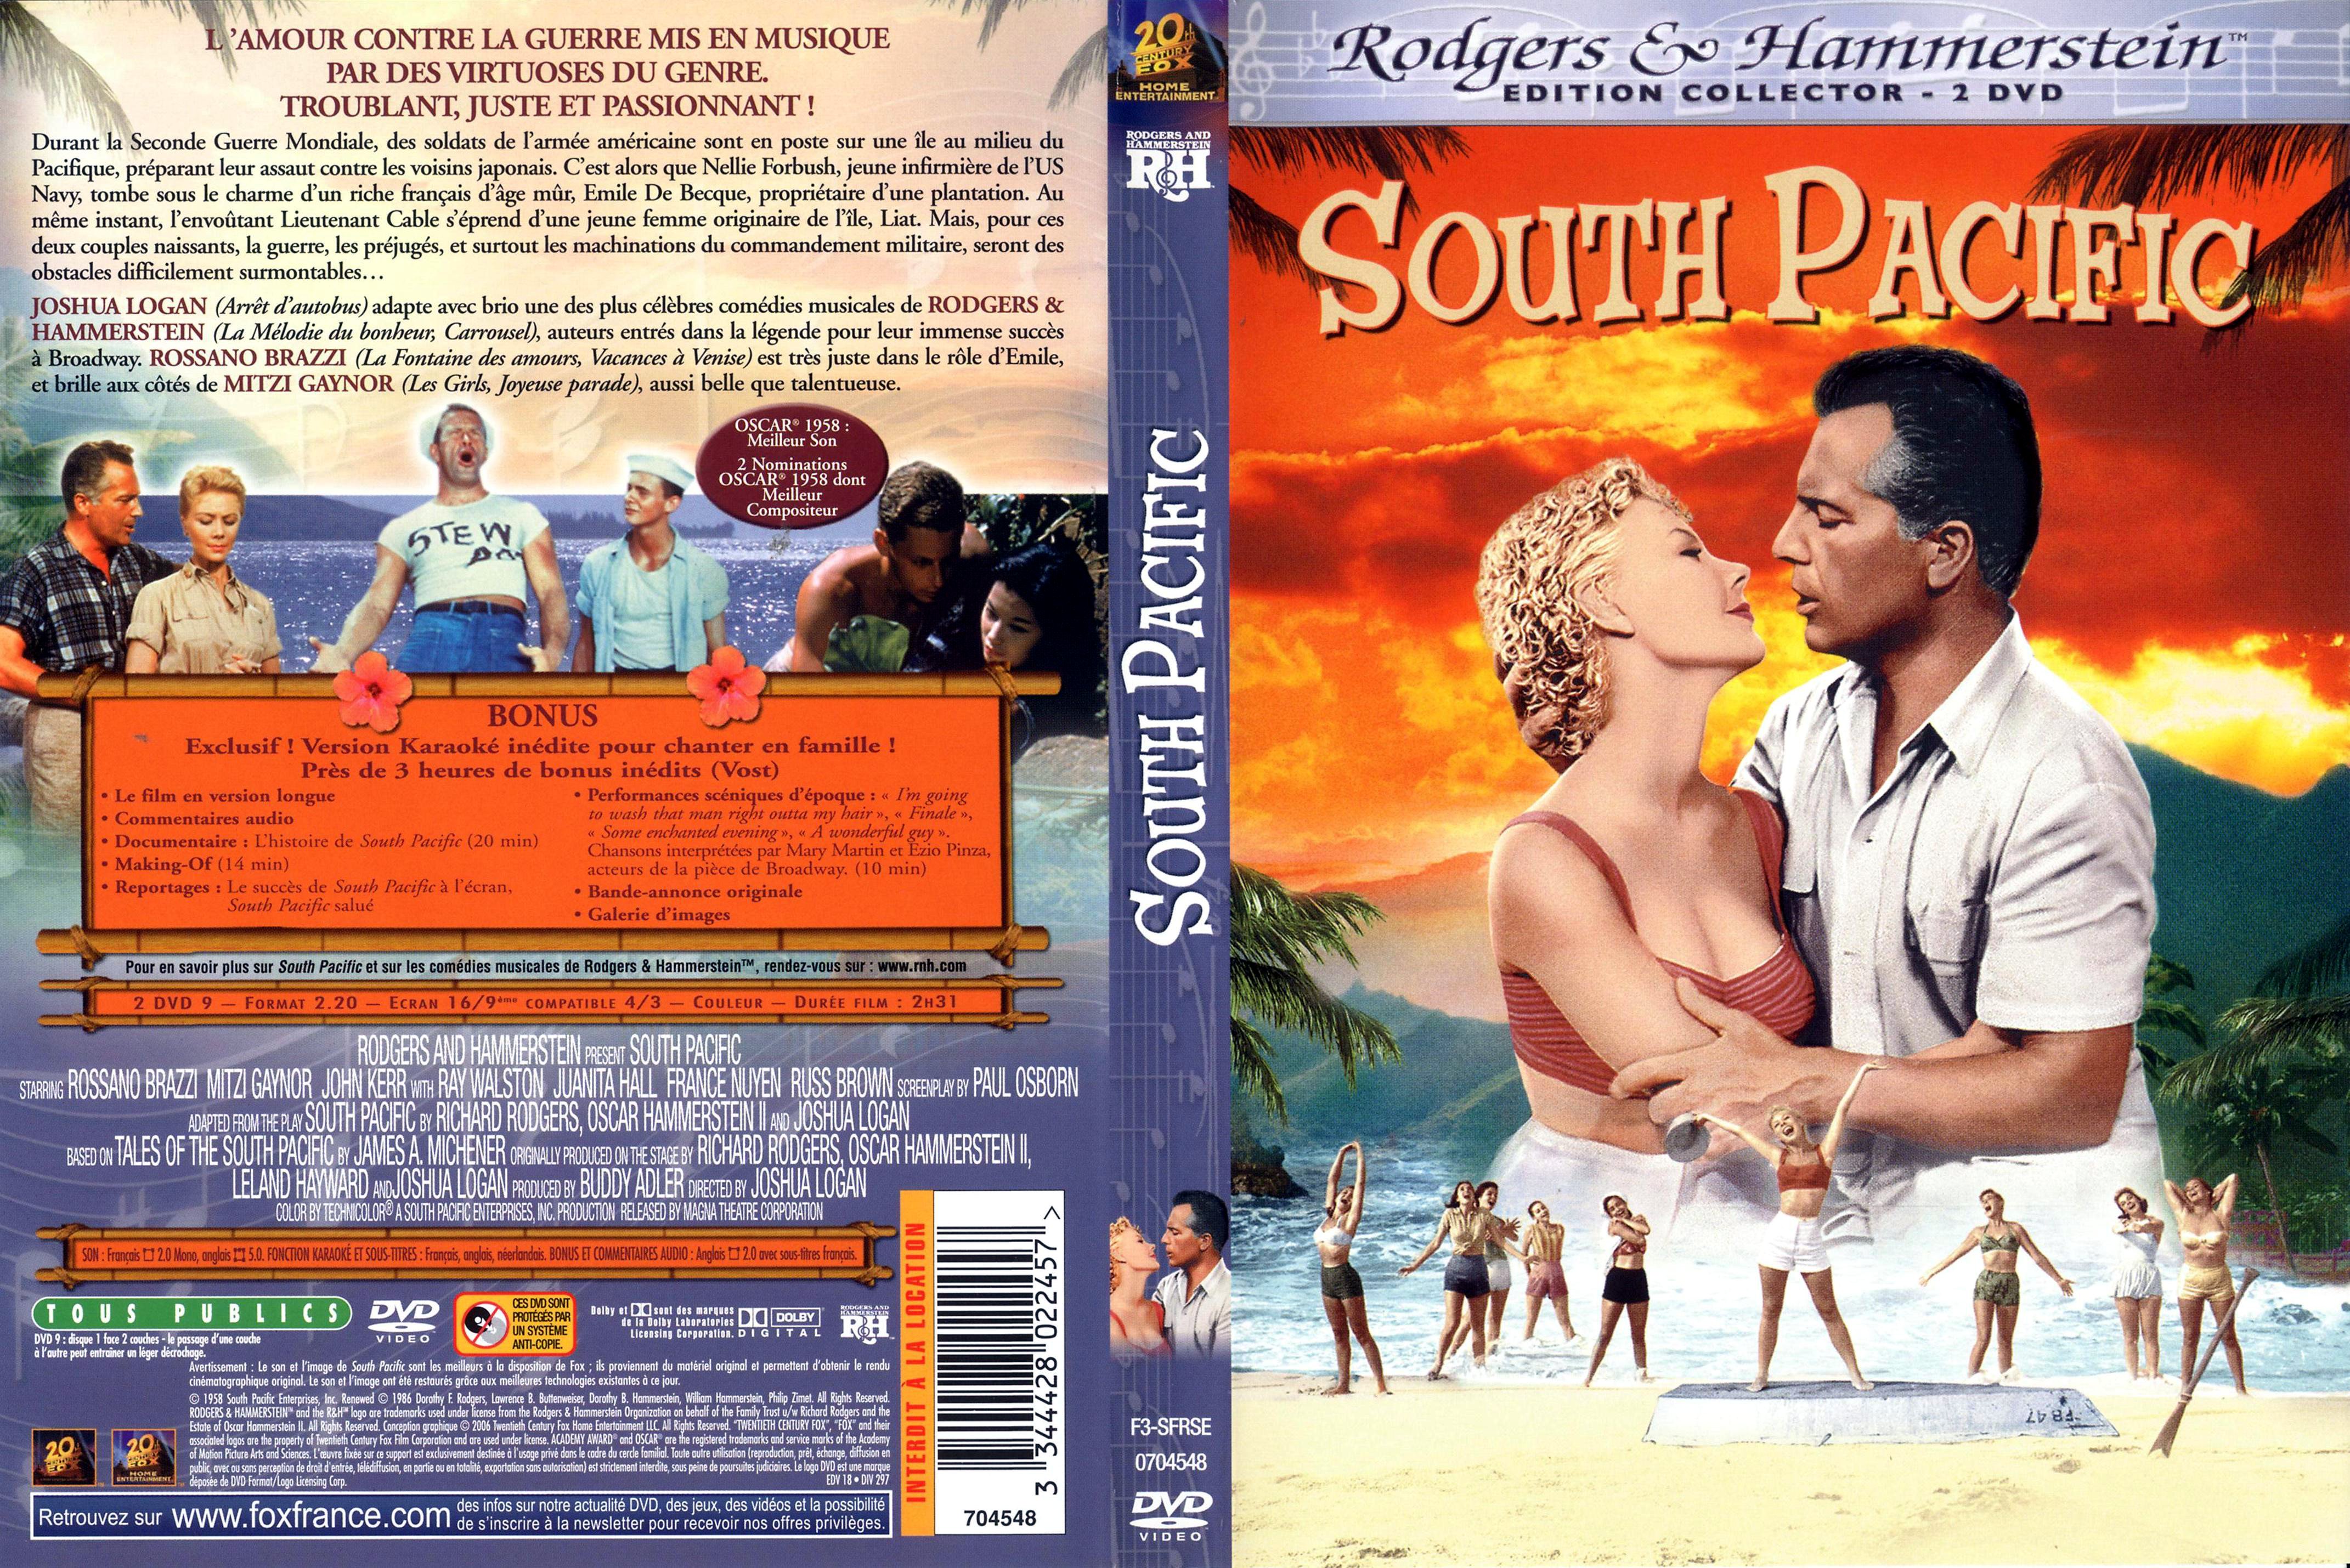 Jaquette DVD South Pacific